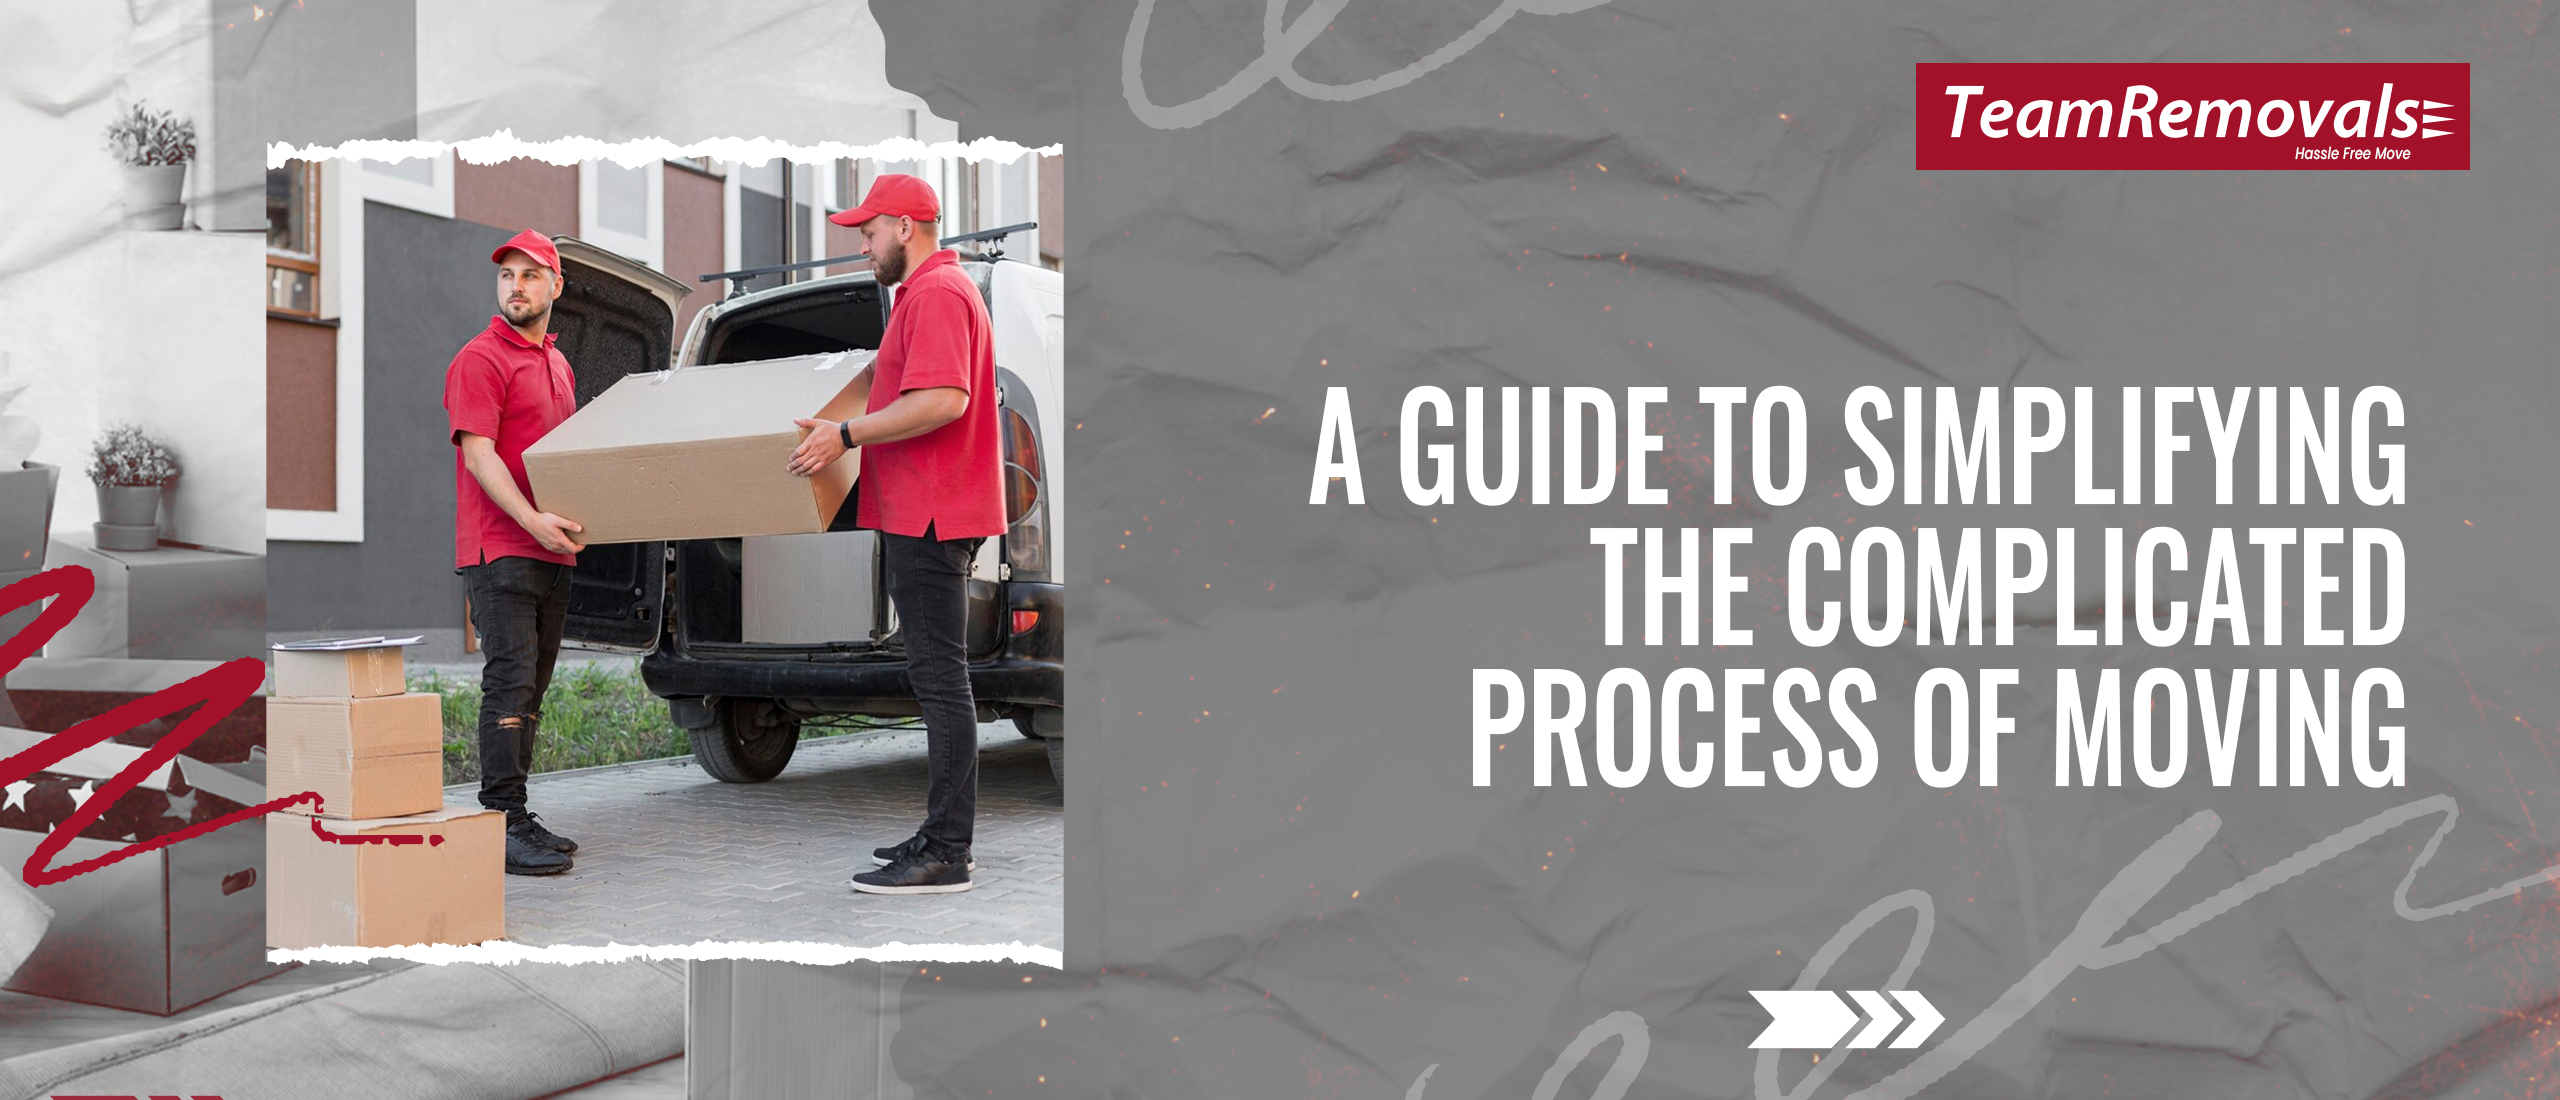 A Guide to Simplifying the Complicated Process of Moving